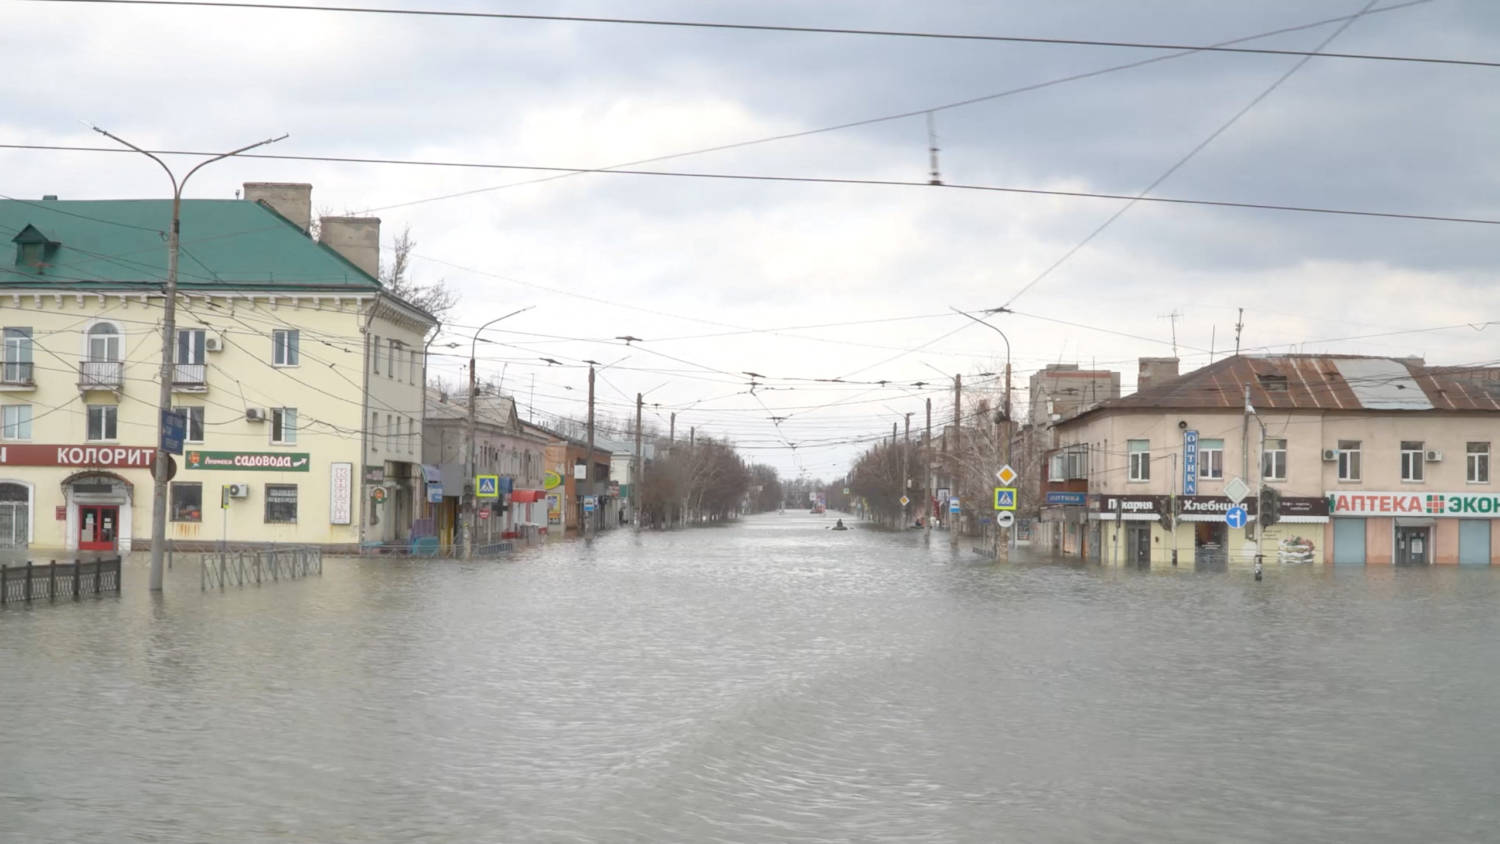 The Flood Hit City Of Orsk